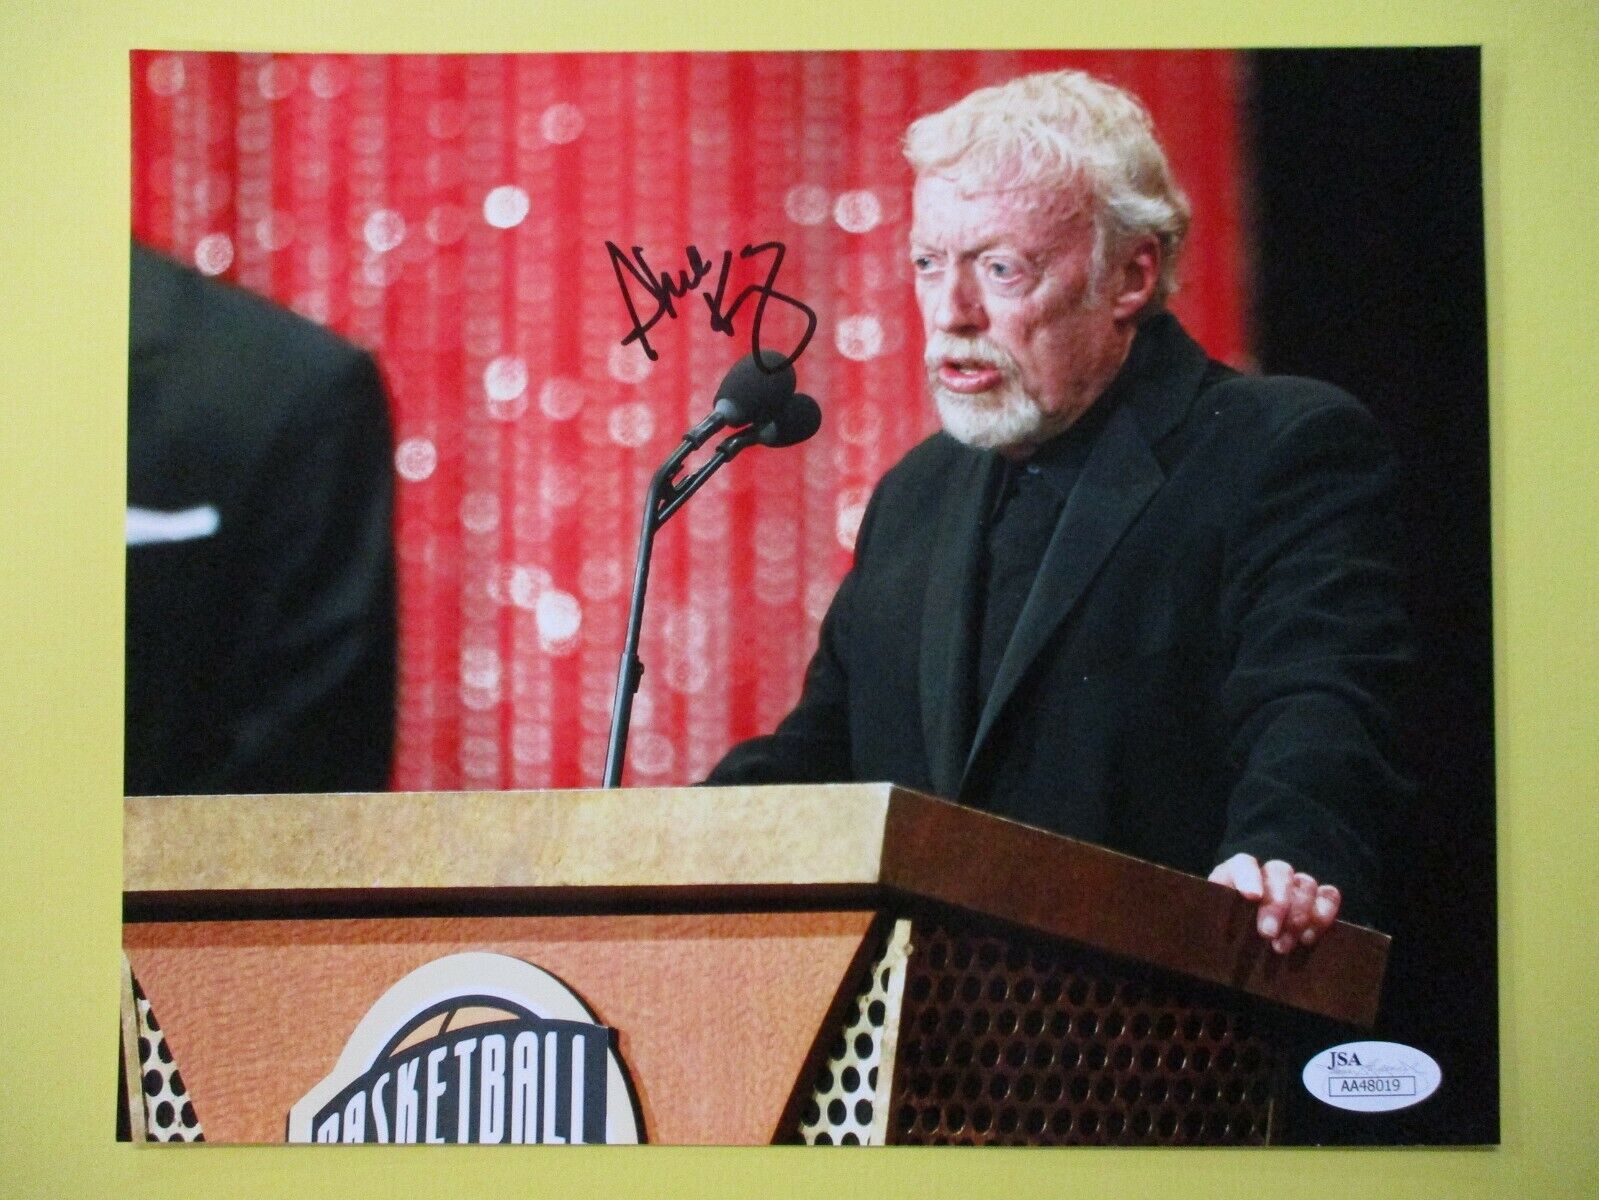 Phil Knight Nike Founder Signed Autographed 8x10 Color Photo JSA COA